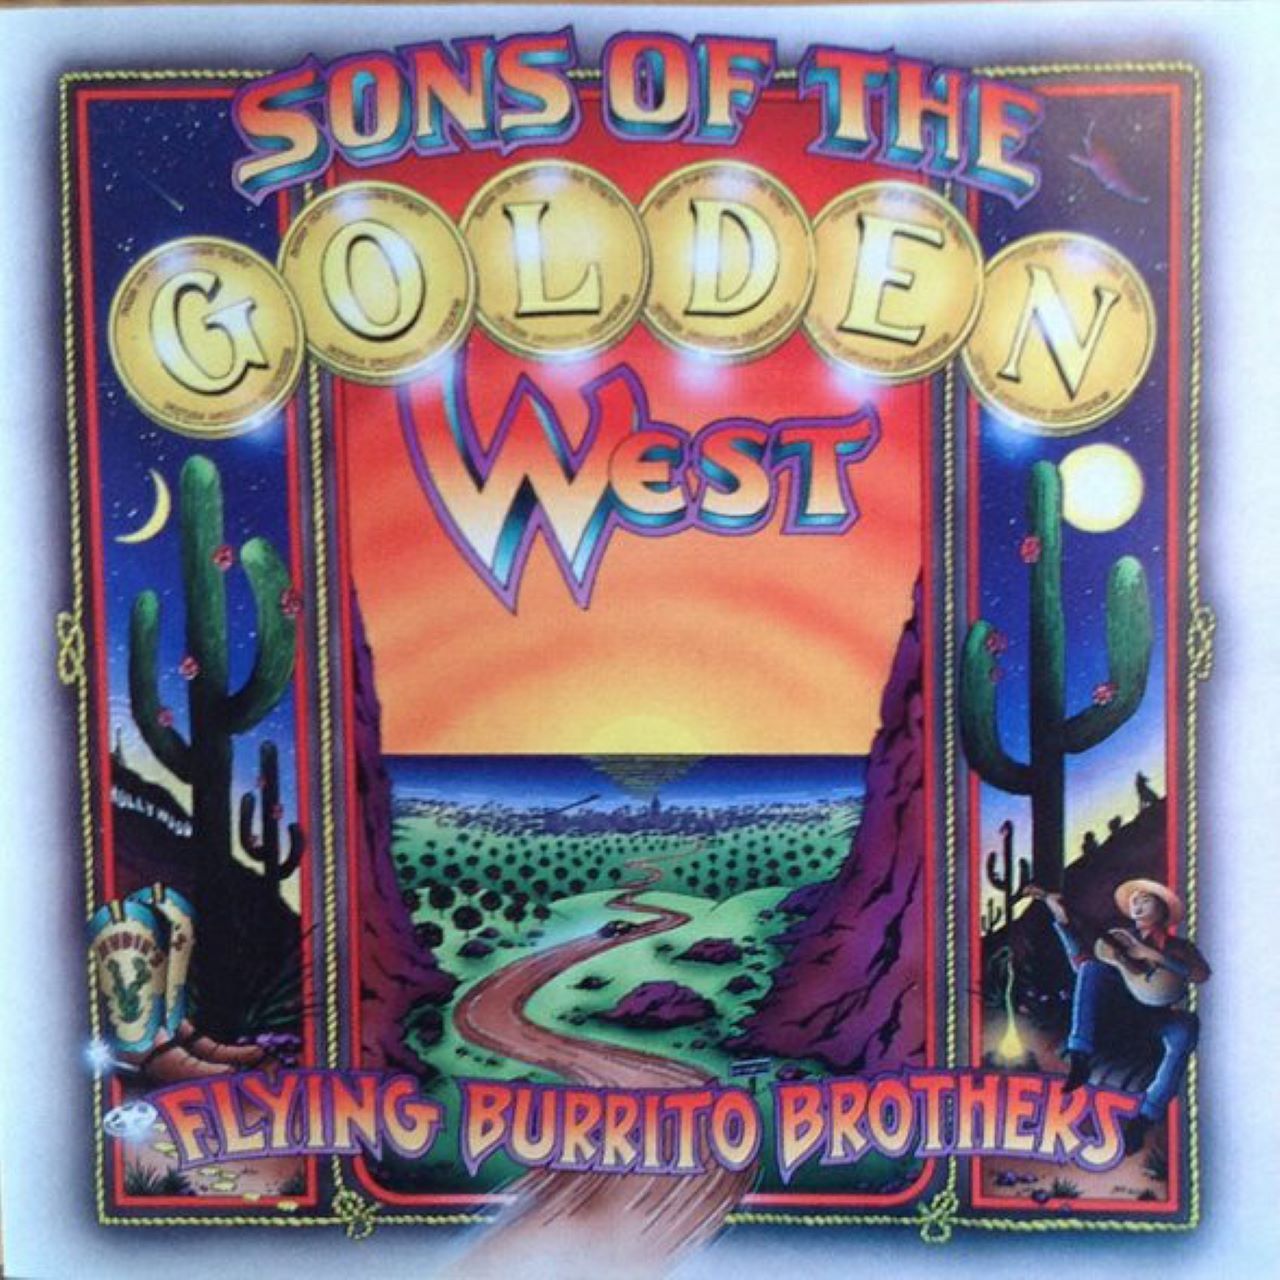 Flying Burrito Brothers - Sons Of The Golden West cover album